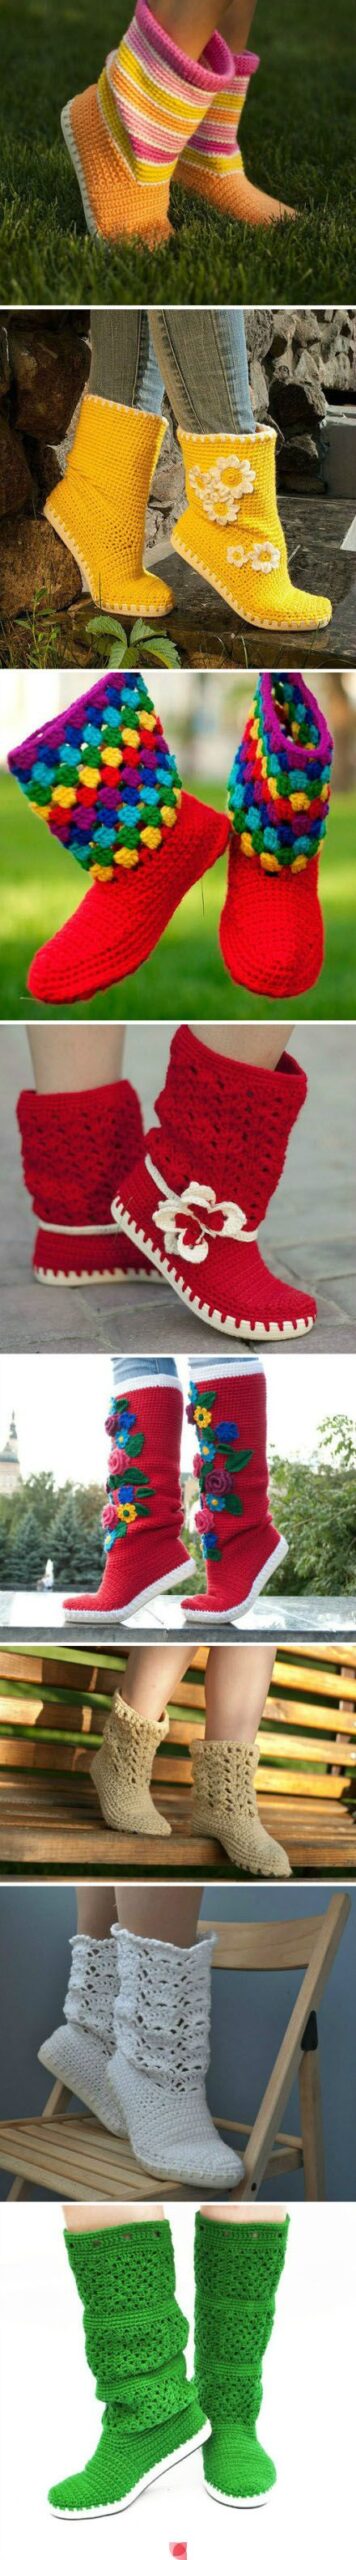 Yay, I found the source for these lovely boots!